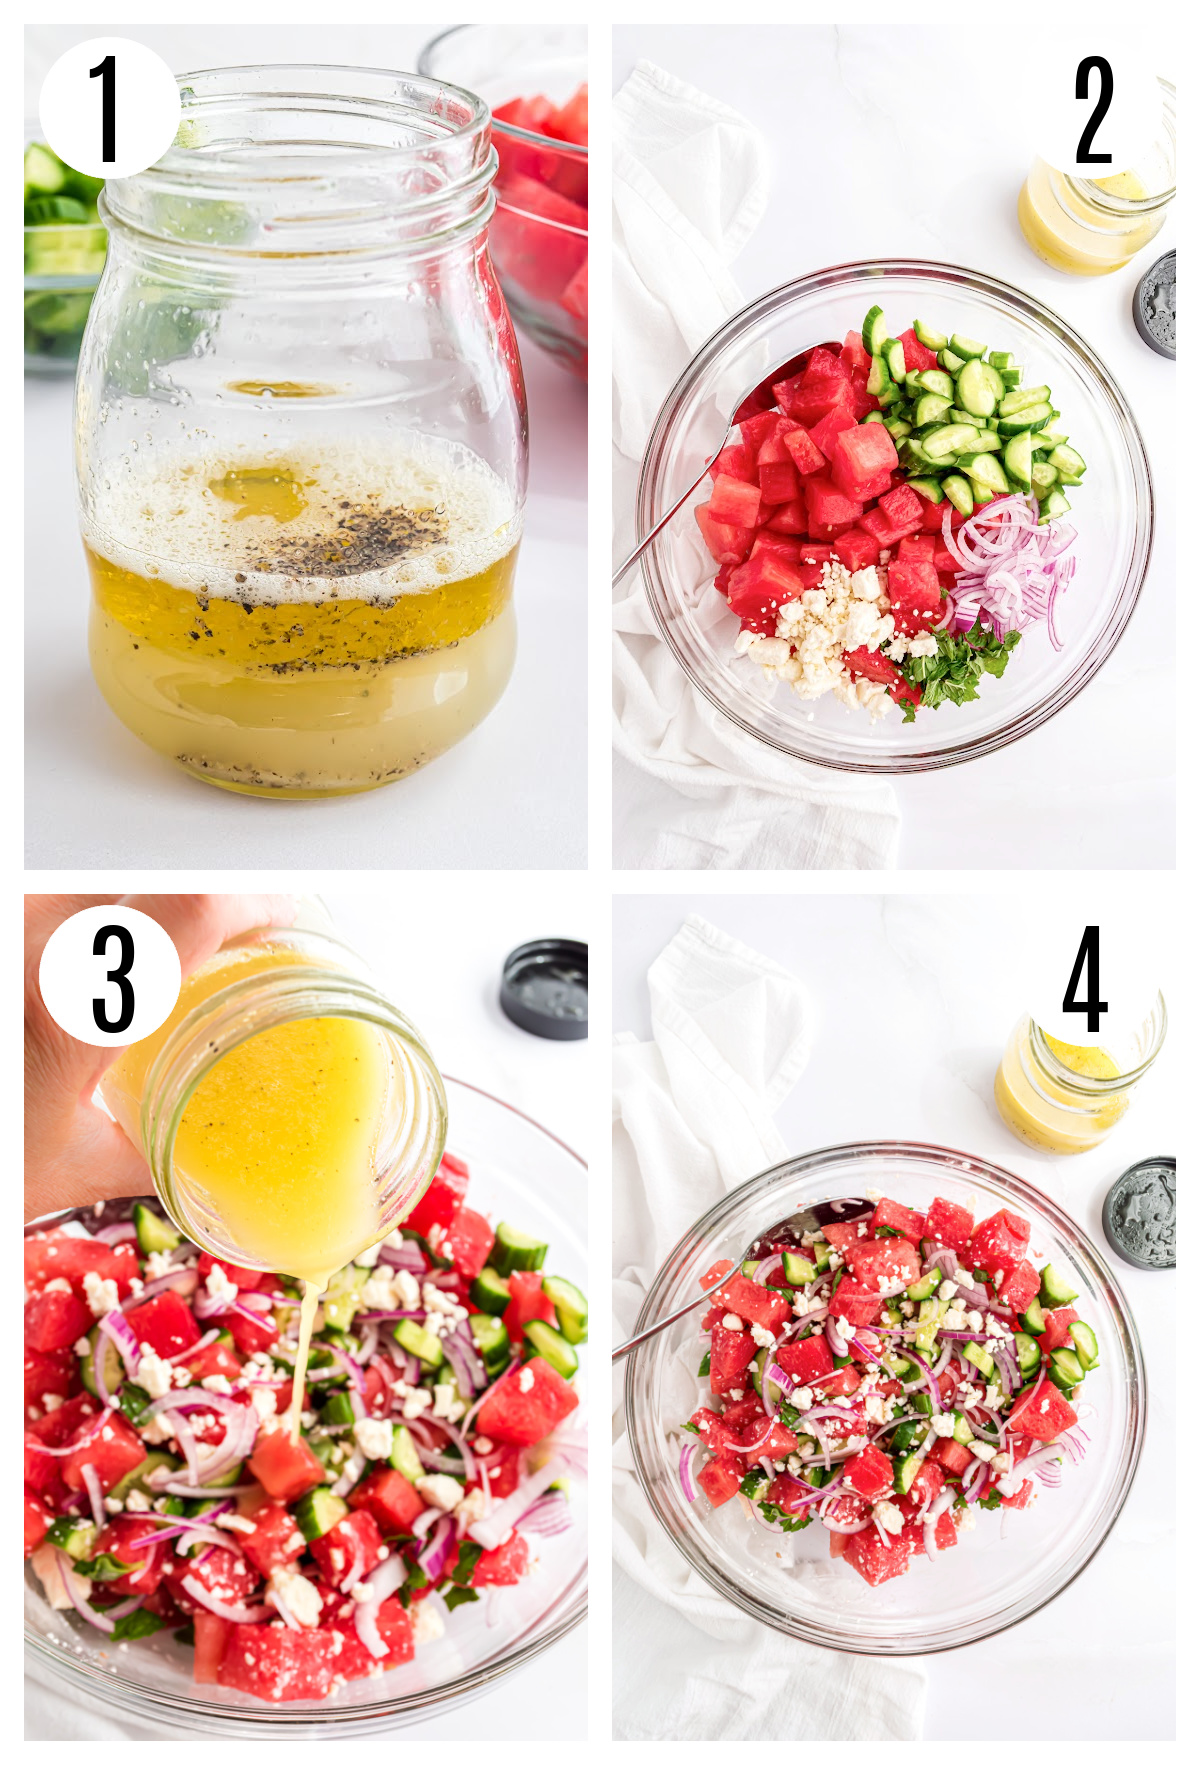 The steps in making the Watermelon Salad with Goat Cheese include adding the dressing ingredients to a jar to combine, adding the salad ingredients to a large bowl, drizzling the dressing on the salad and tossing to coat.